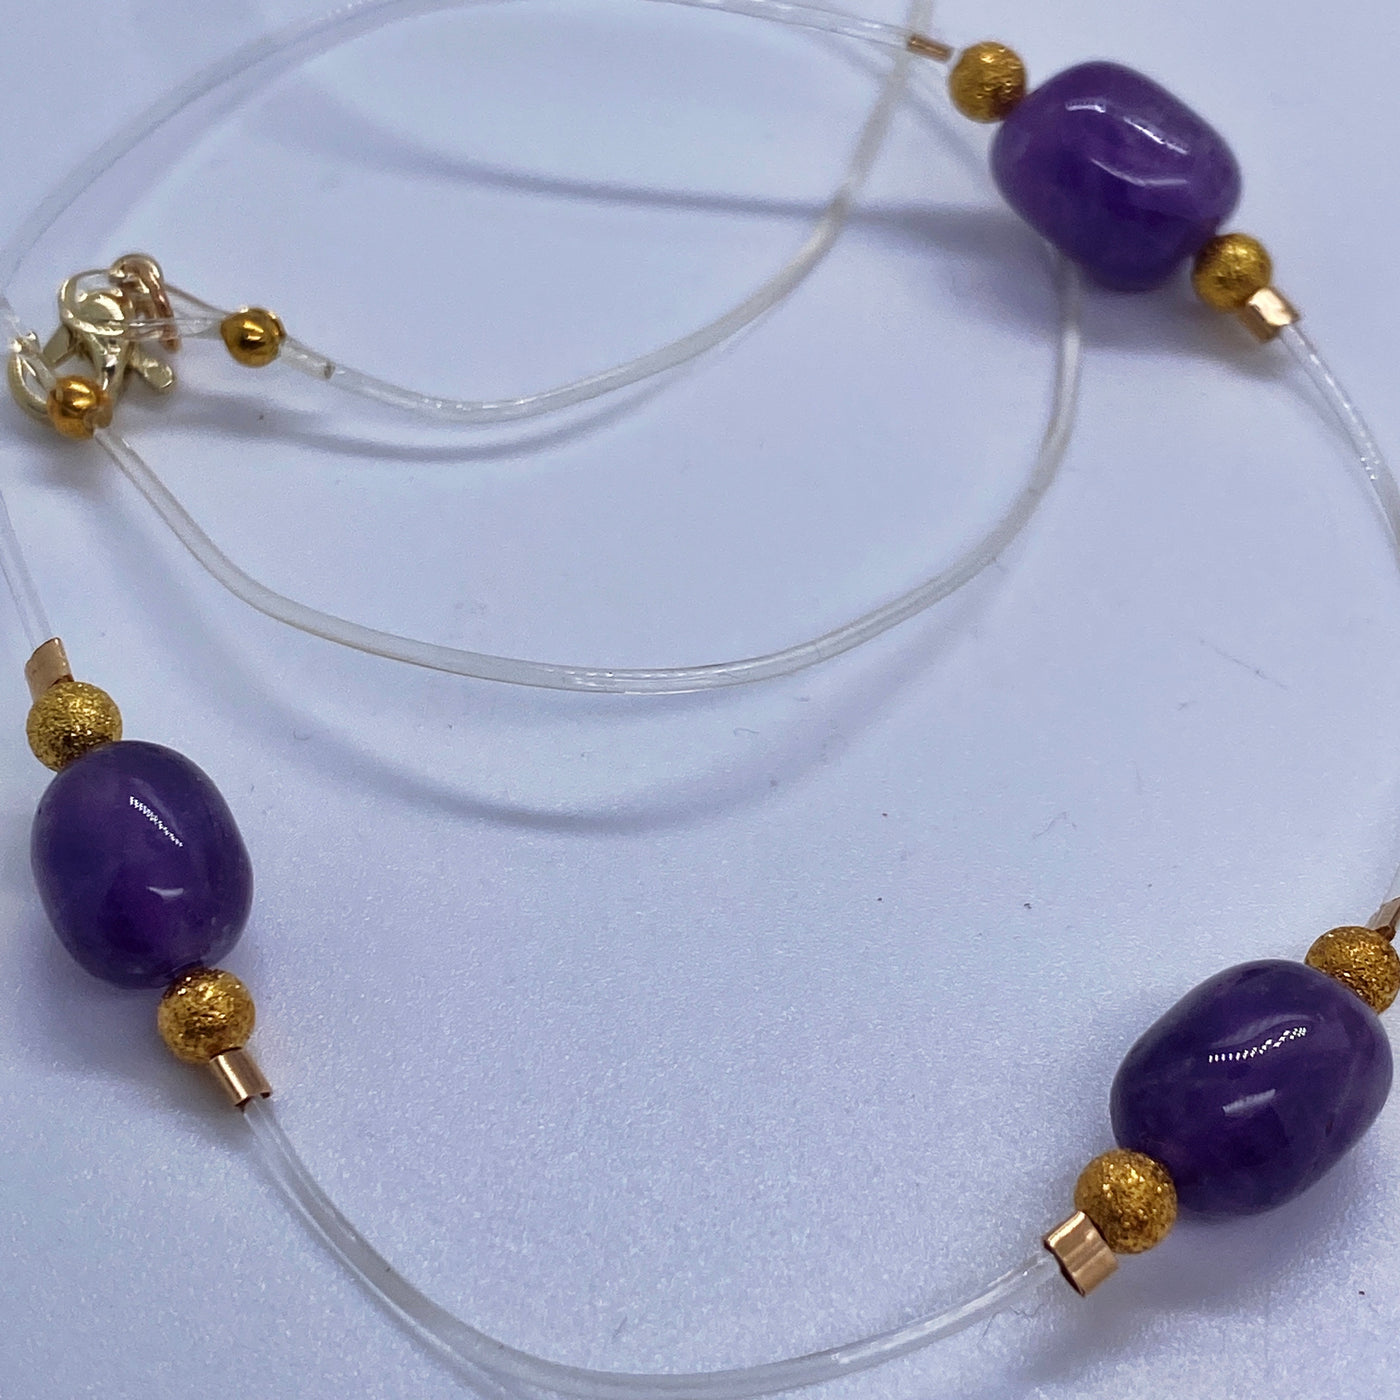 Naked necklace with amethysts